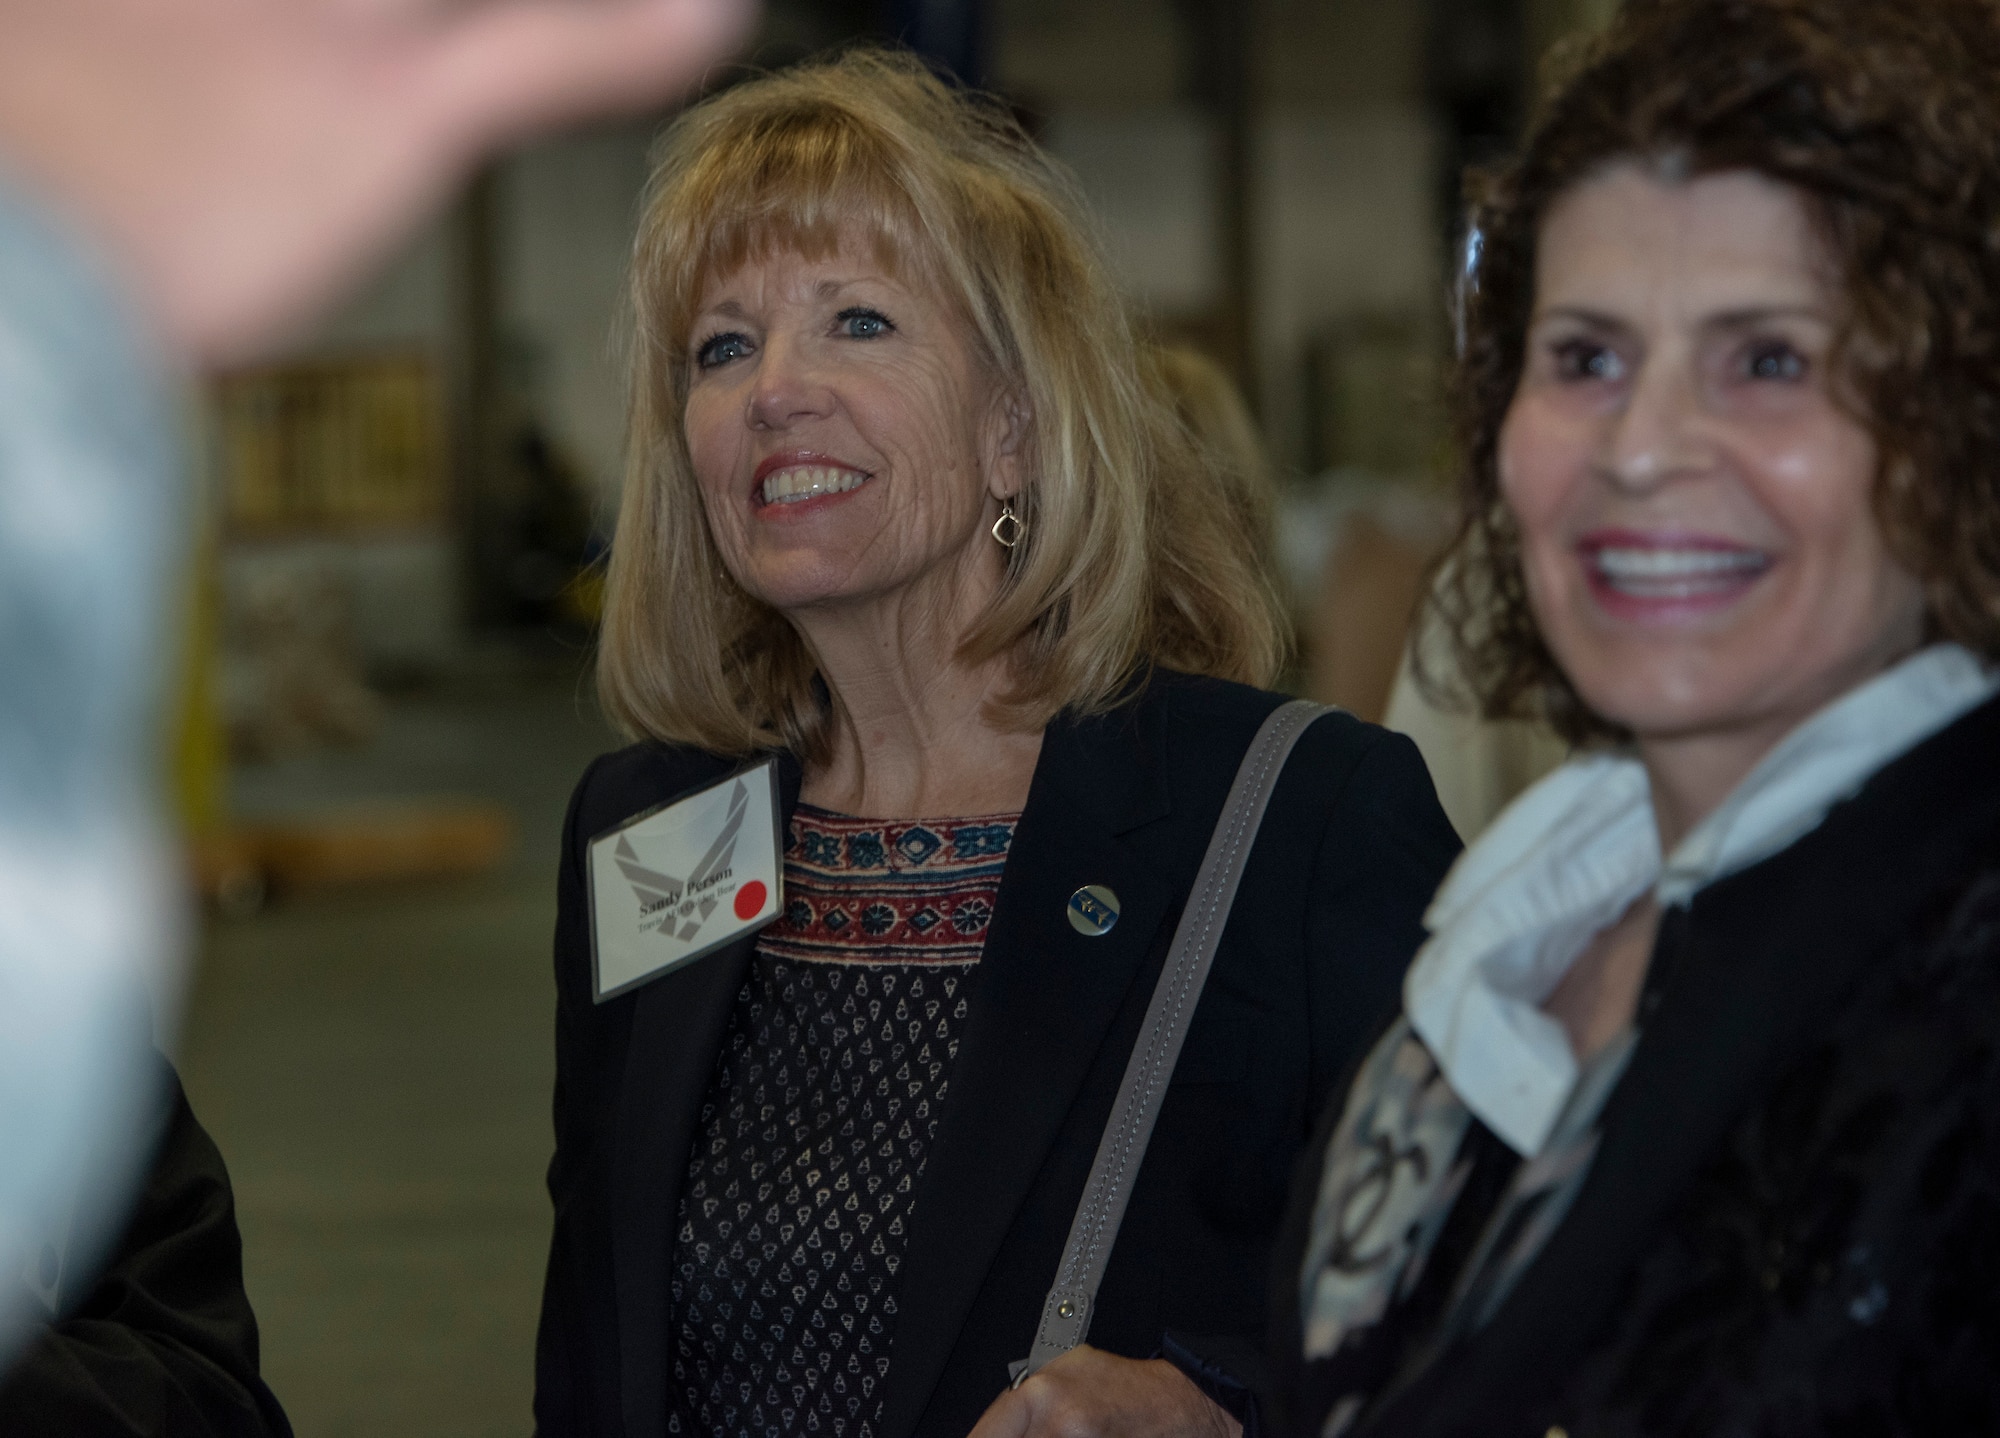 Sandy Person, left, Air Force-level civic leader, and Heidi Campini, 60th Medical Support Squadron honorary commander, participate in a tour through the 60th Aerial Port Squadron warehouse Oct. 12, 2018, Travis Air Force Base, California. Civic leaders and honorary commanders tour the base quarterly to promote relationships with Team Travis leadership, and communicate mutual interest, challenges and concerns. (U.S. Air Force Photo by Heide Couch)